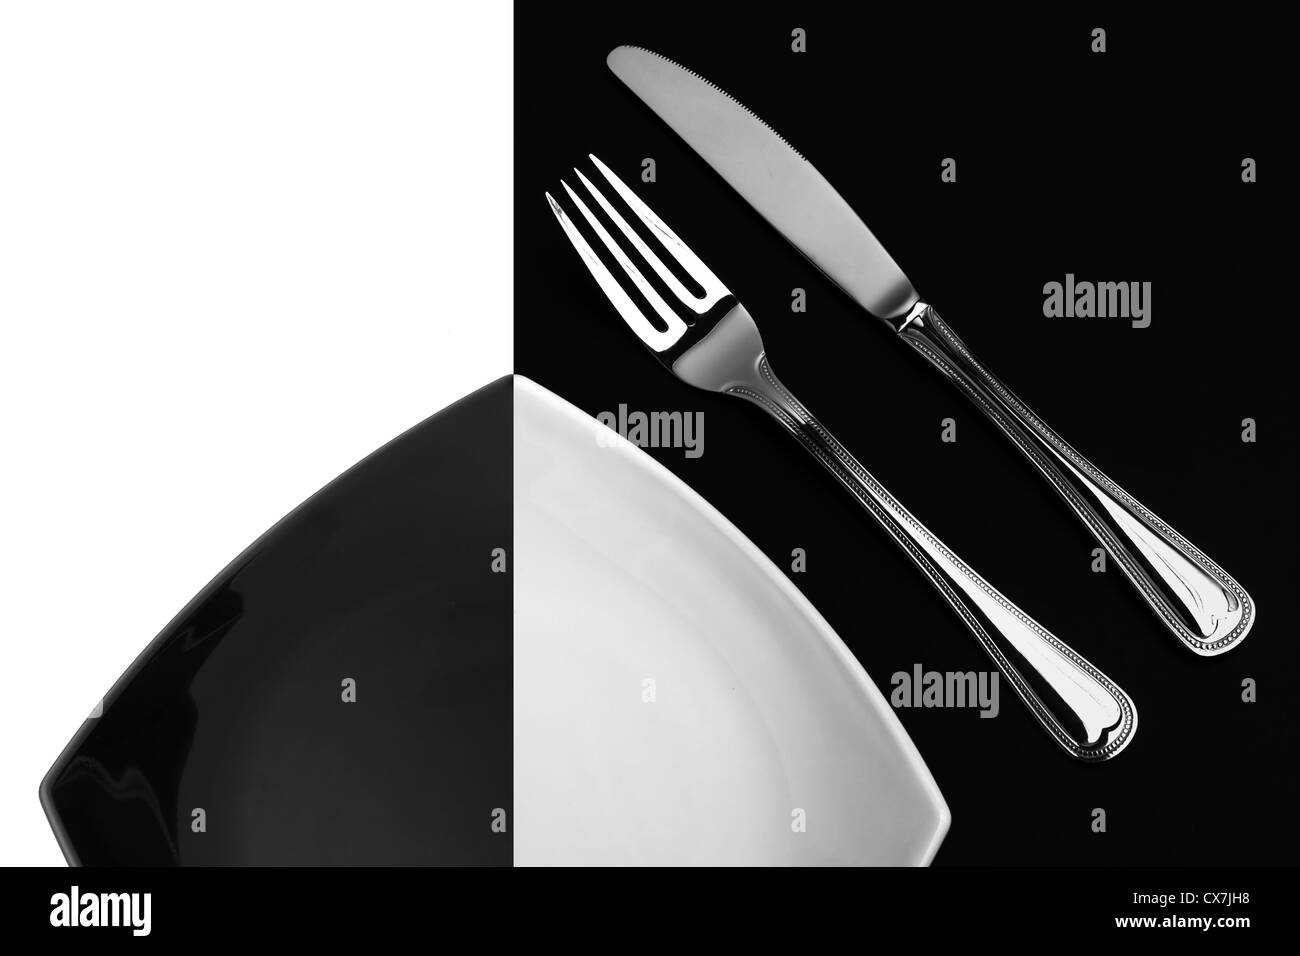 Knife, square white plate and fork on black background Stock Photo